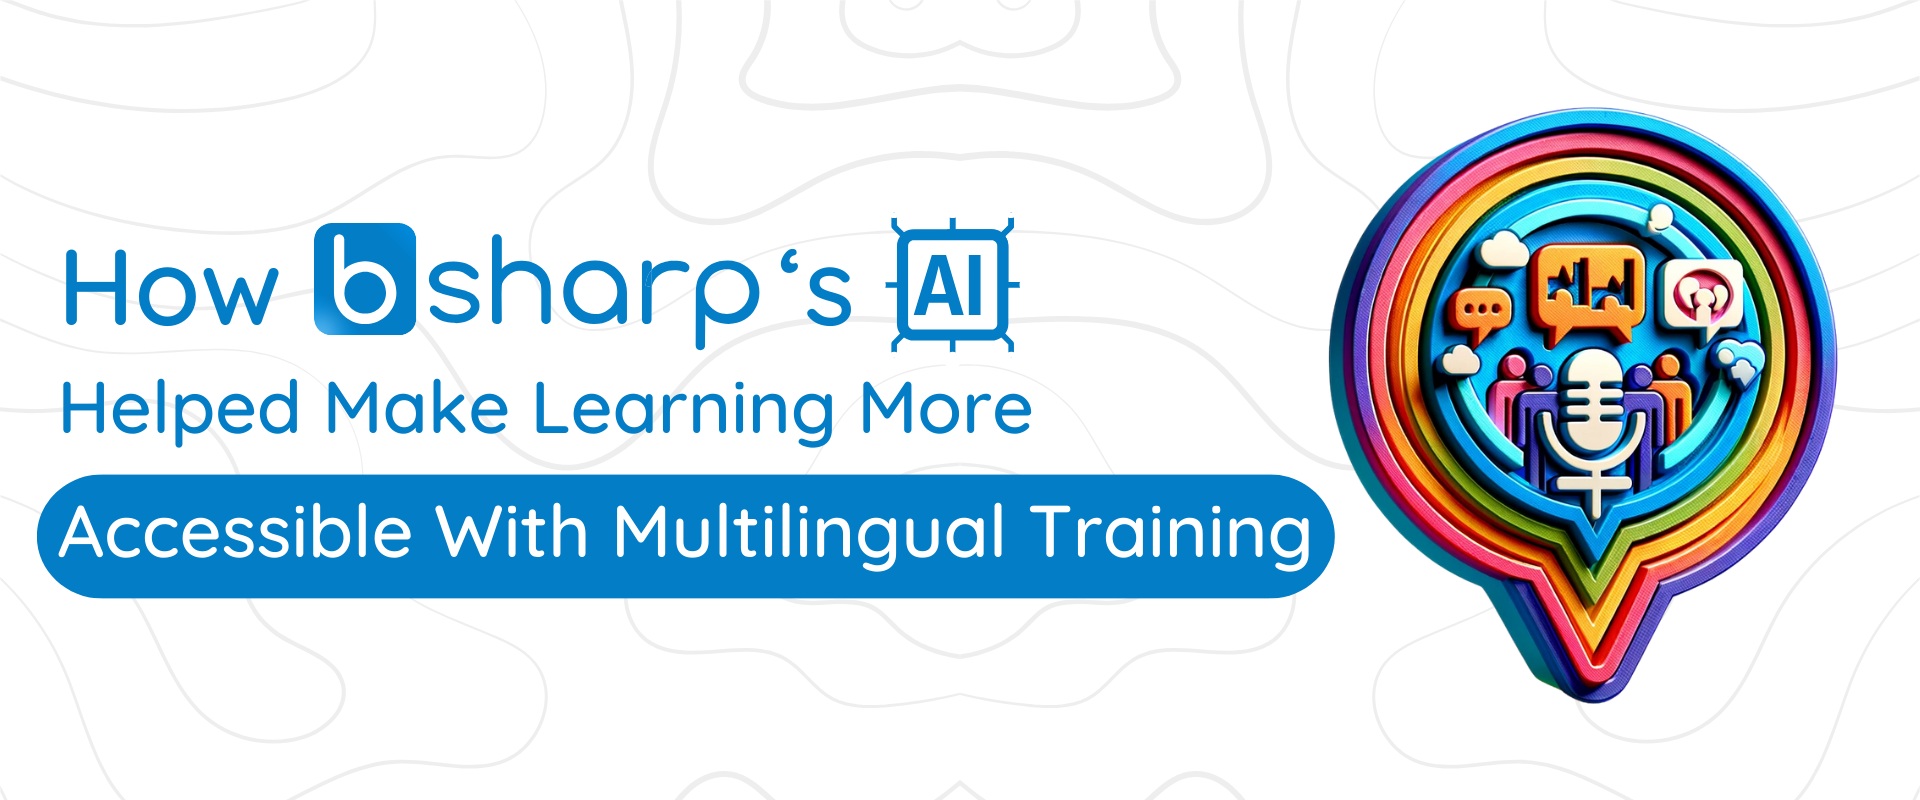 How bsharp helped make learning accessible with multi-lingual training.